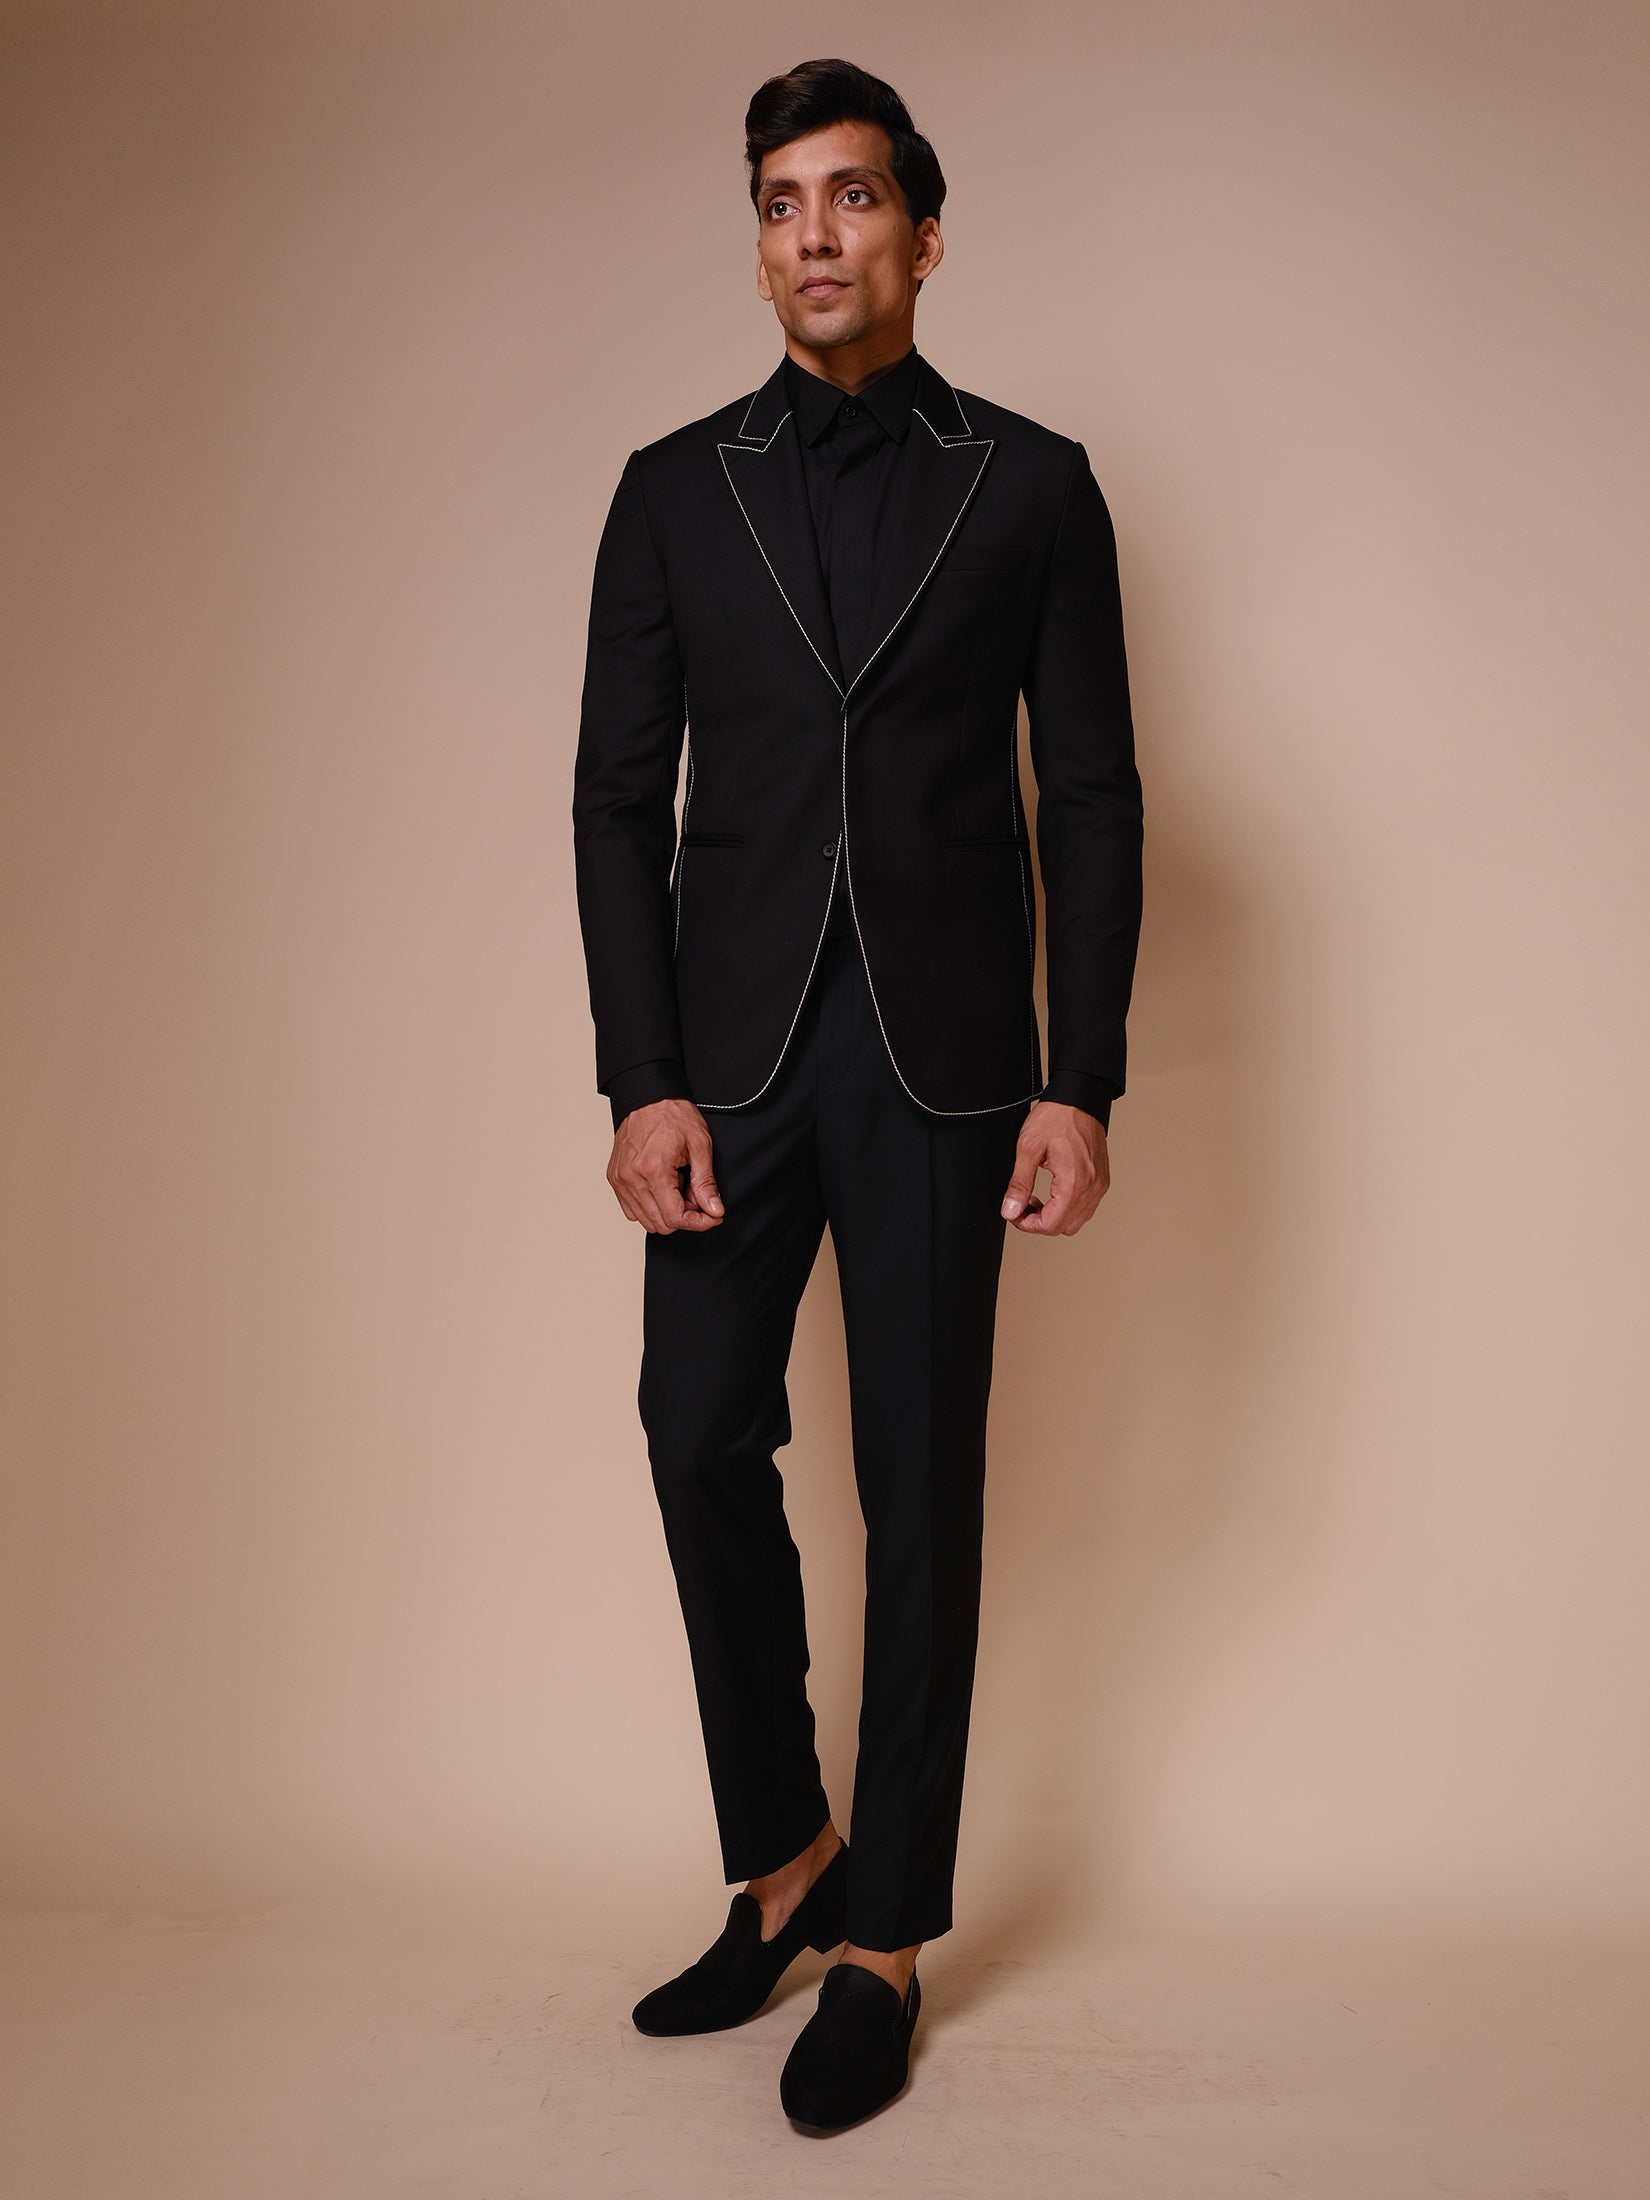 Black Peak Lapel Suit With All Over White Outline  Paired With Trousers And Tonal Shirt